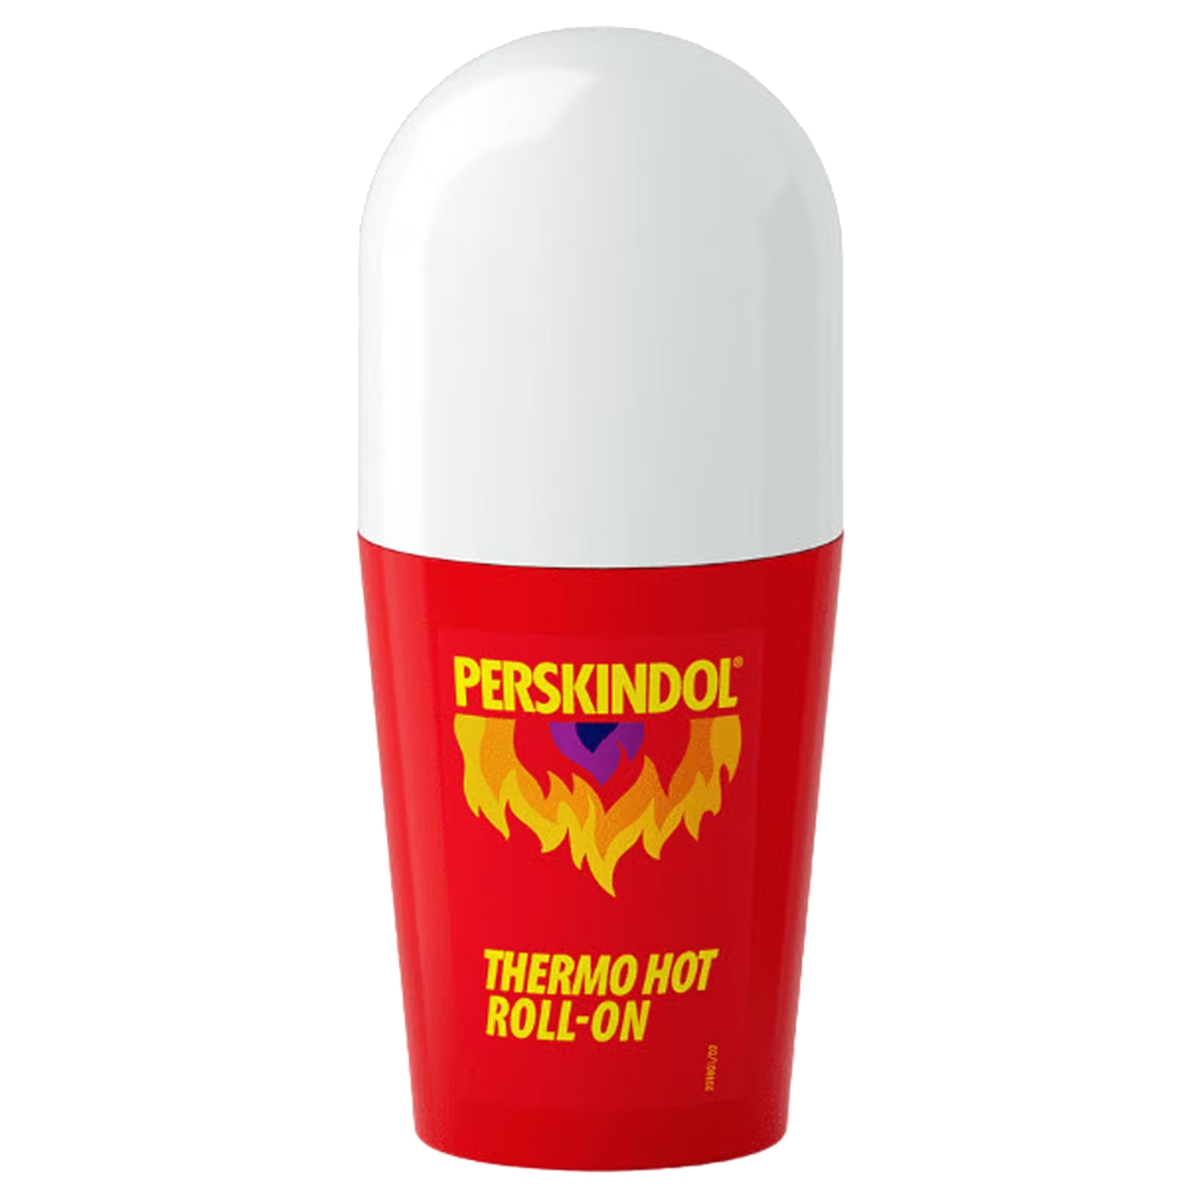 PERSKINDOL Thermo Hot Roll-on 75 ml